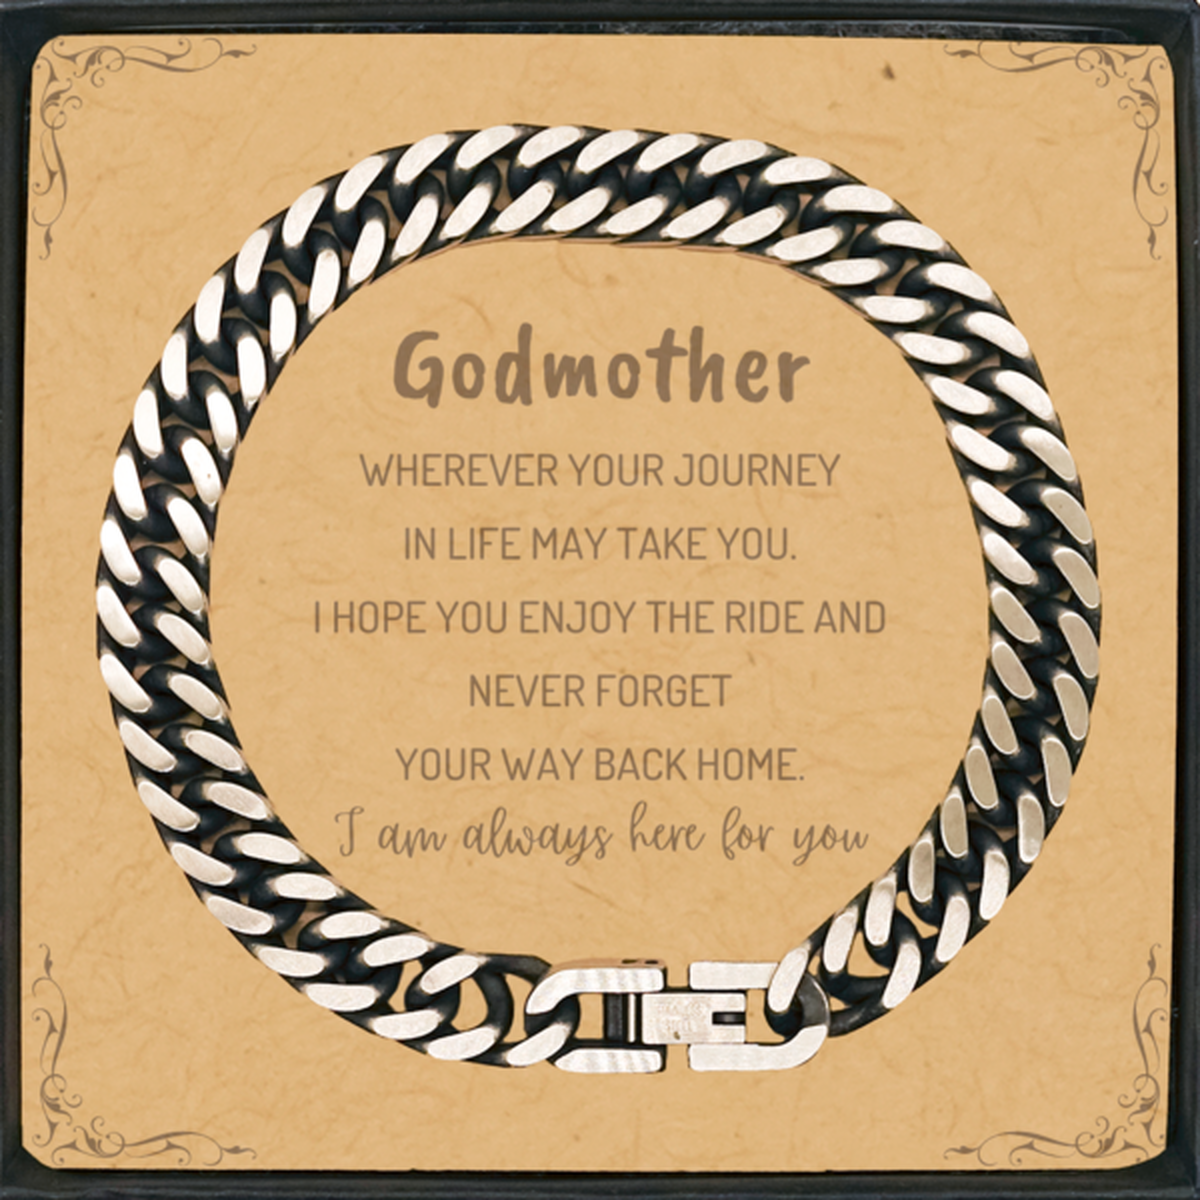 Godmother wherever your journey in life may take you, I am always here for you Godmother Cuban Link Chain Bracelet, Awesome Christmas Gifts For Godmother Message Card, Godmother Birthday Gifts for Men Women Family Loved One